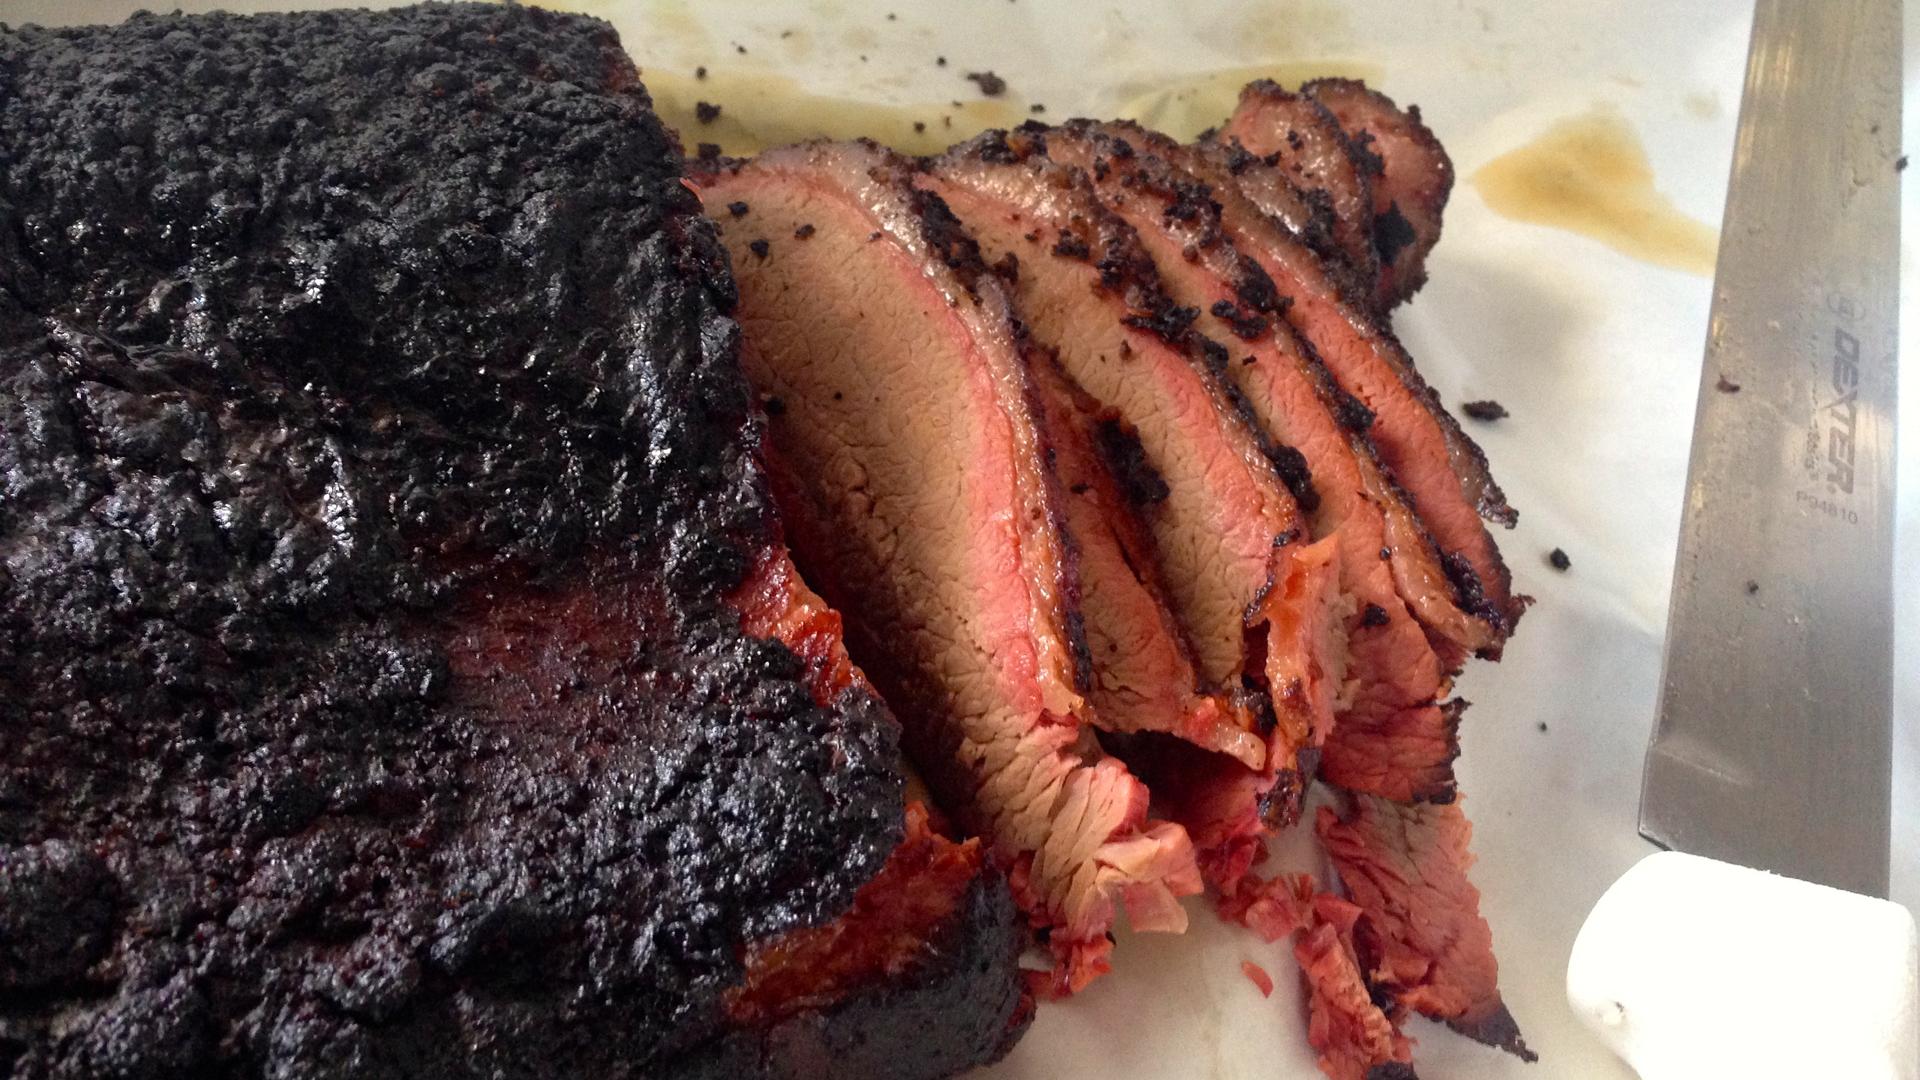 Here's what the brisket looks like at Chopped n Smoked.